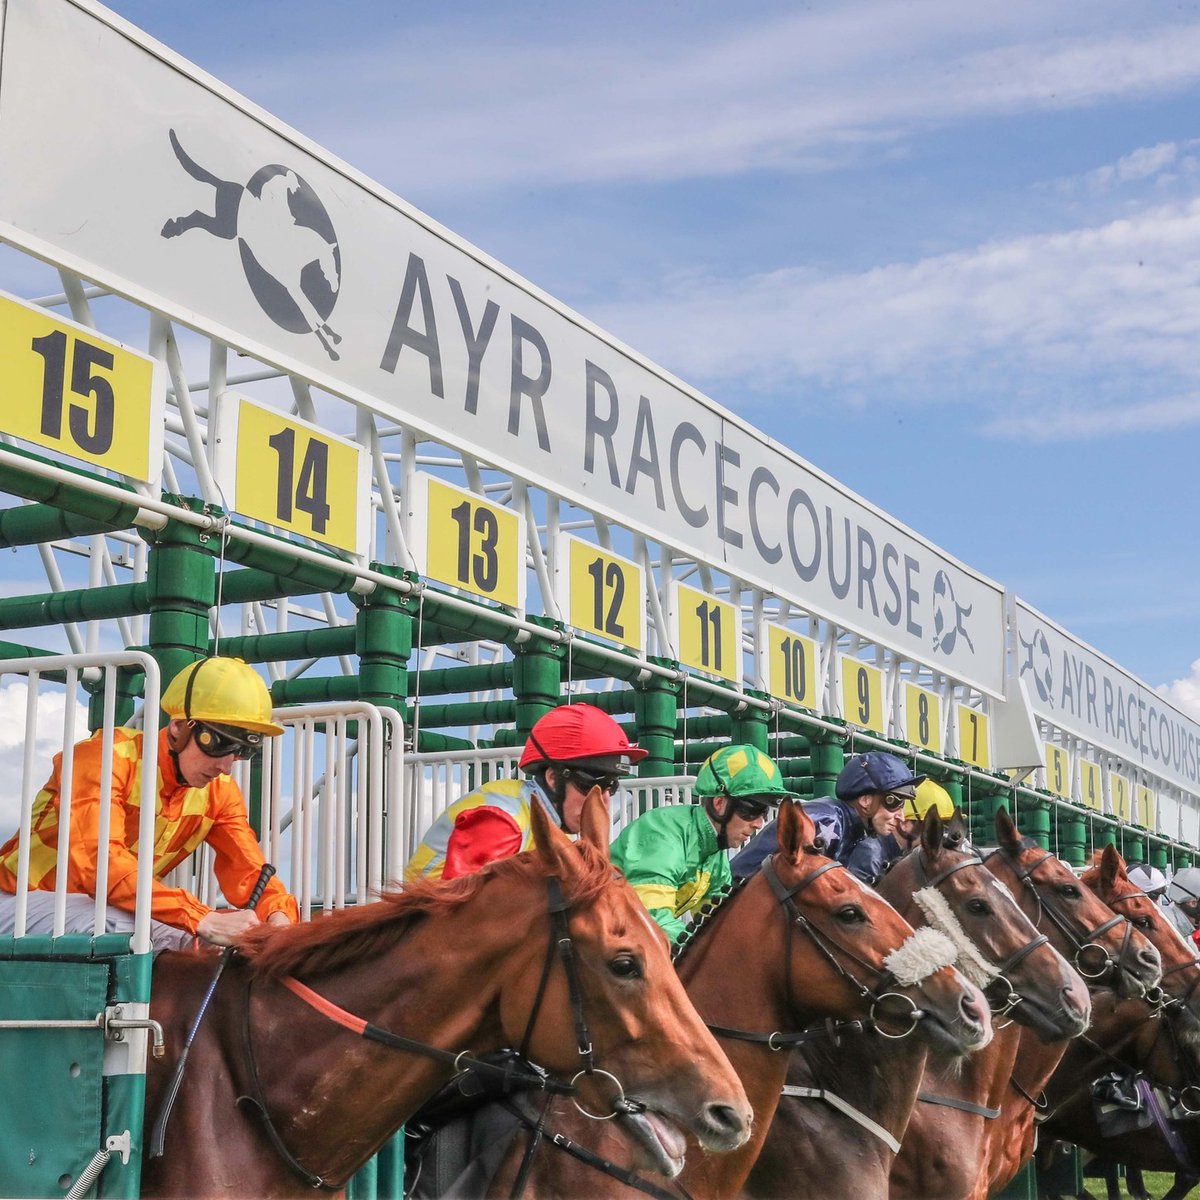 🐎 Day 4 of 4 Horse Racing Tipping Competition 🐎

🐎MONDAY 29 APRIL🐎 #PigeonSwoop4
@ayrracecourse 245 315 350 425

📺 @RacingTV 📺

#OpenToAll ✅